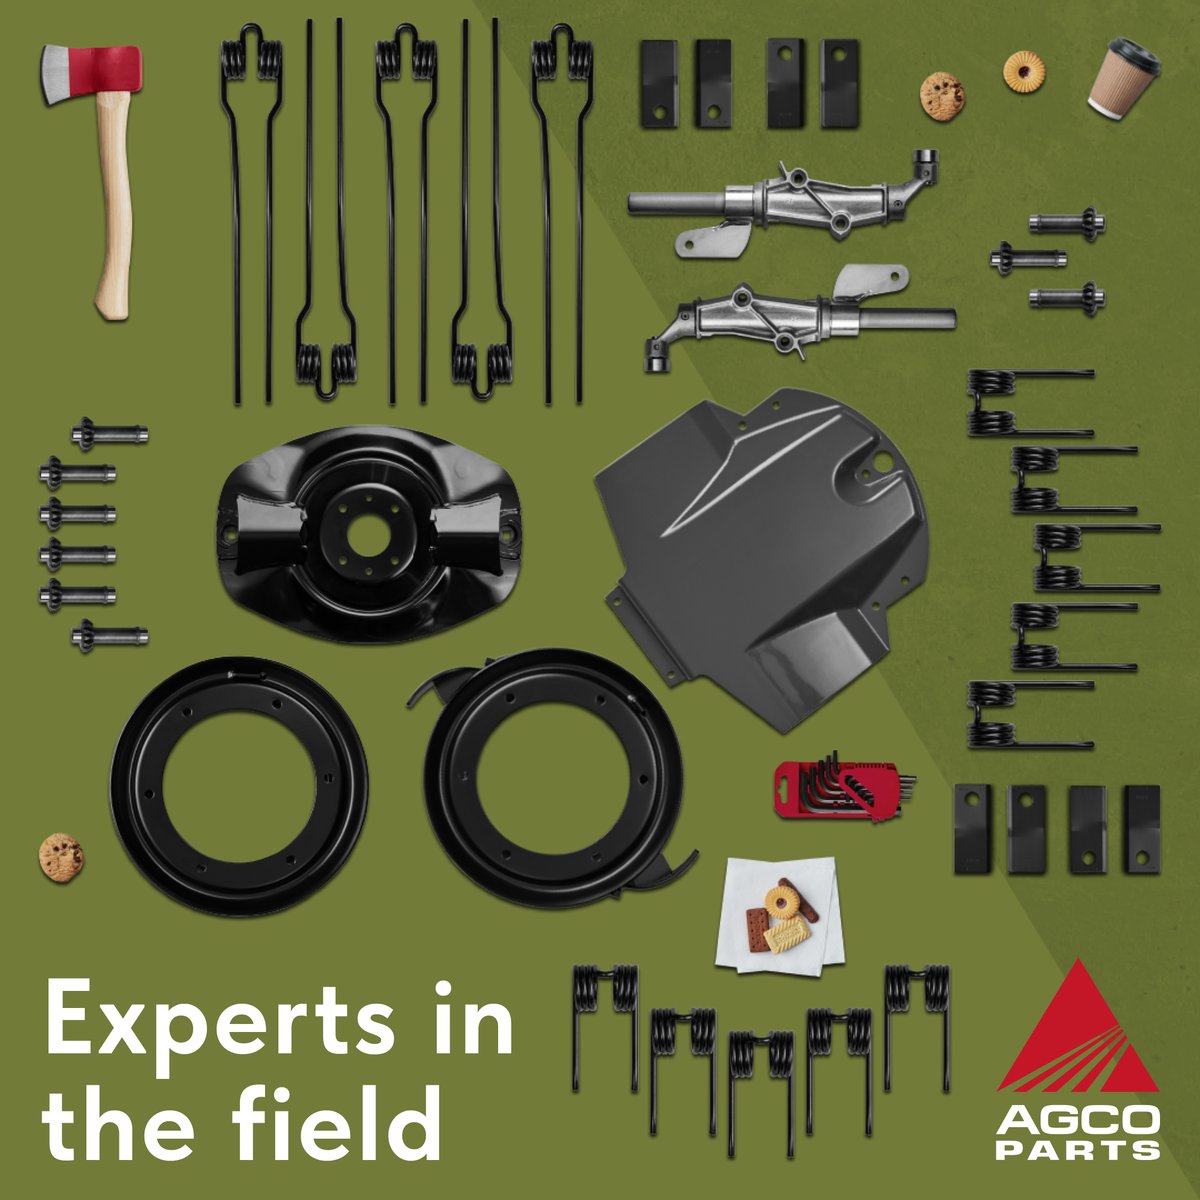 Its time to prepare for the season ahead! From Fliters to heavy-duty parts, we got your covered! Speak to one of our Parts Specalist for all your spare parts enquiries! #AGCOParts